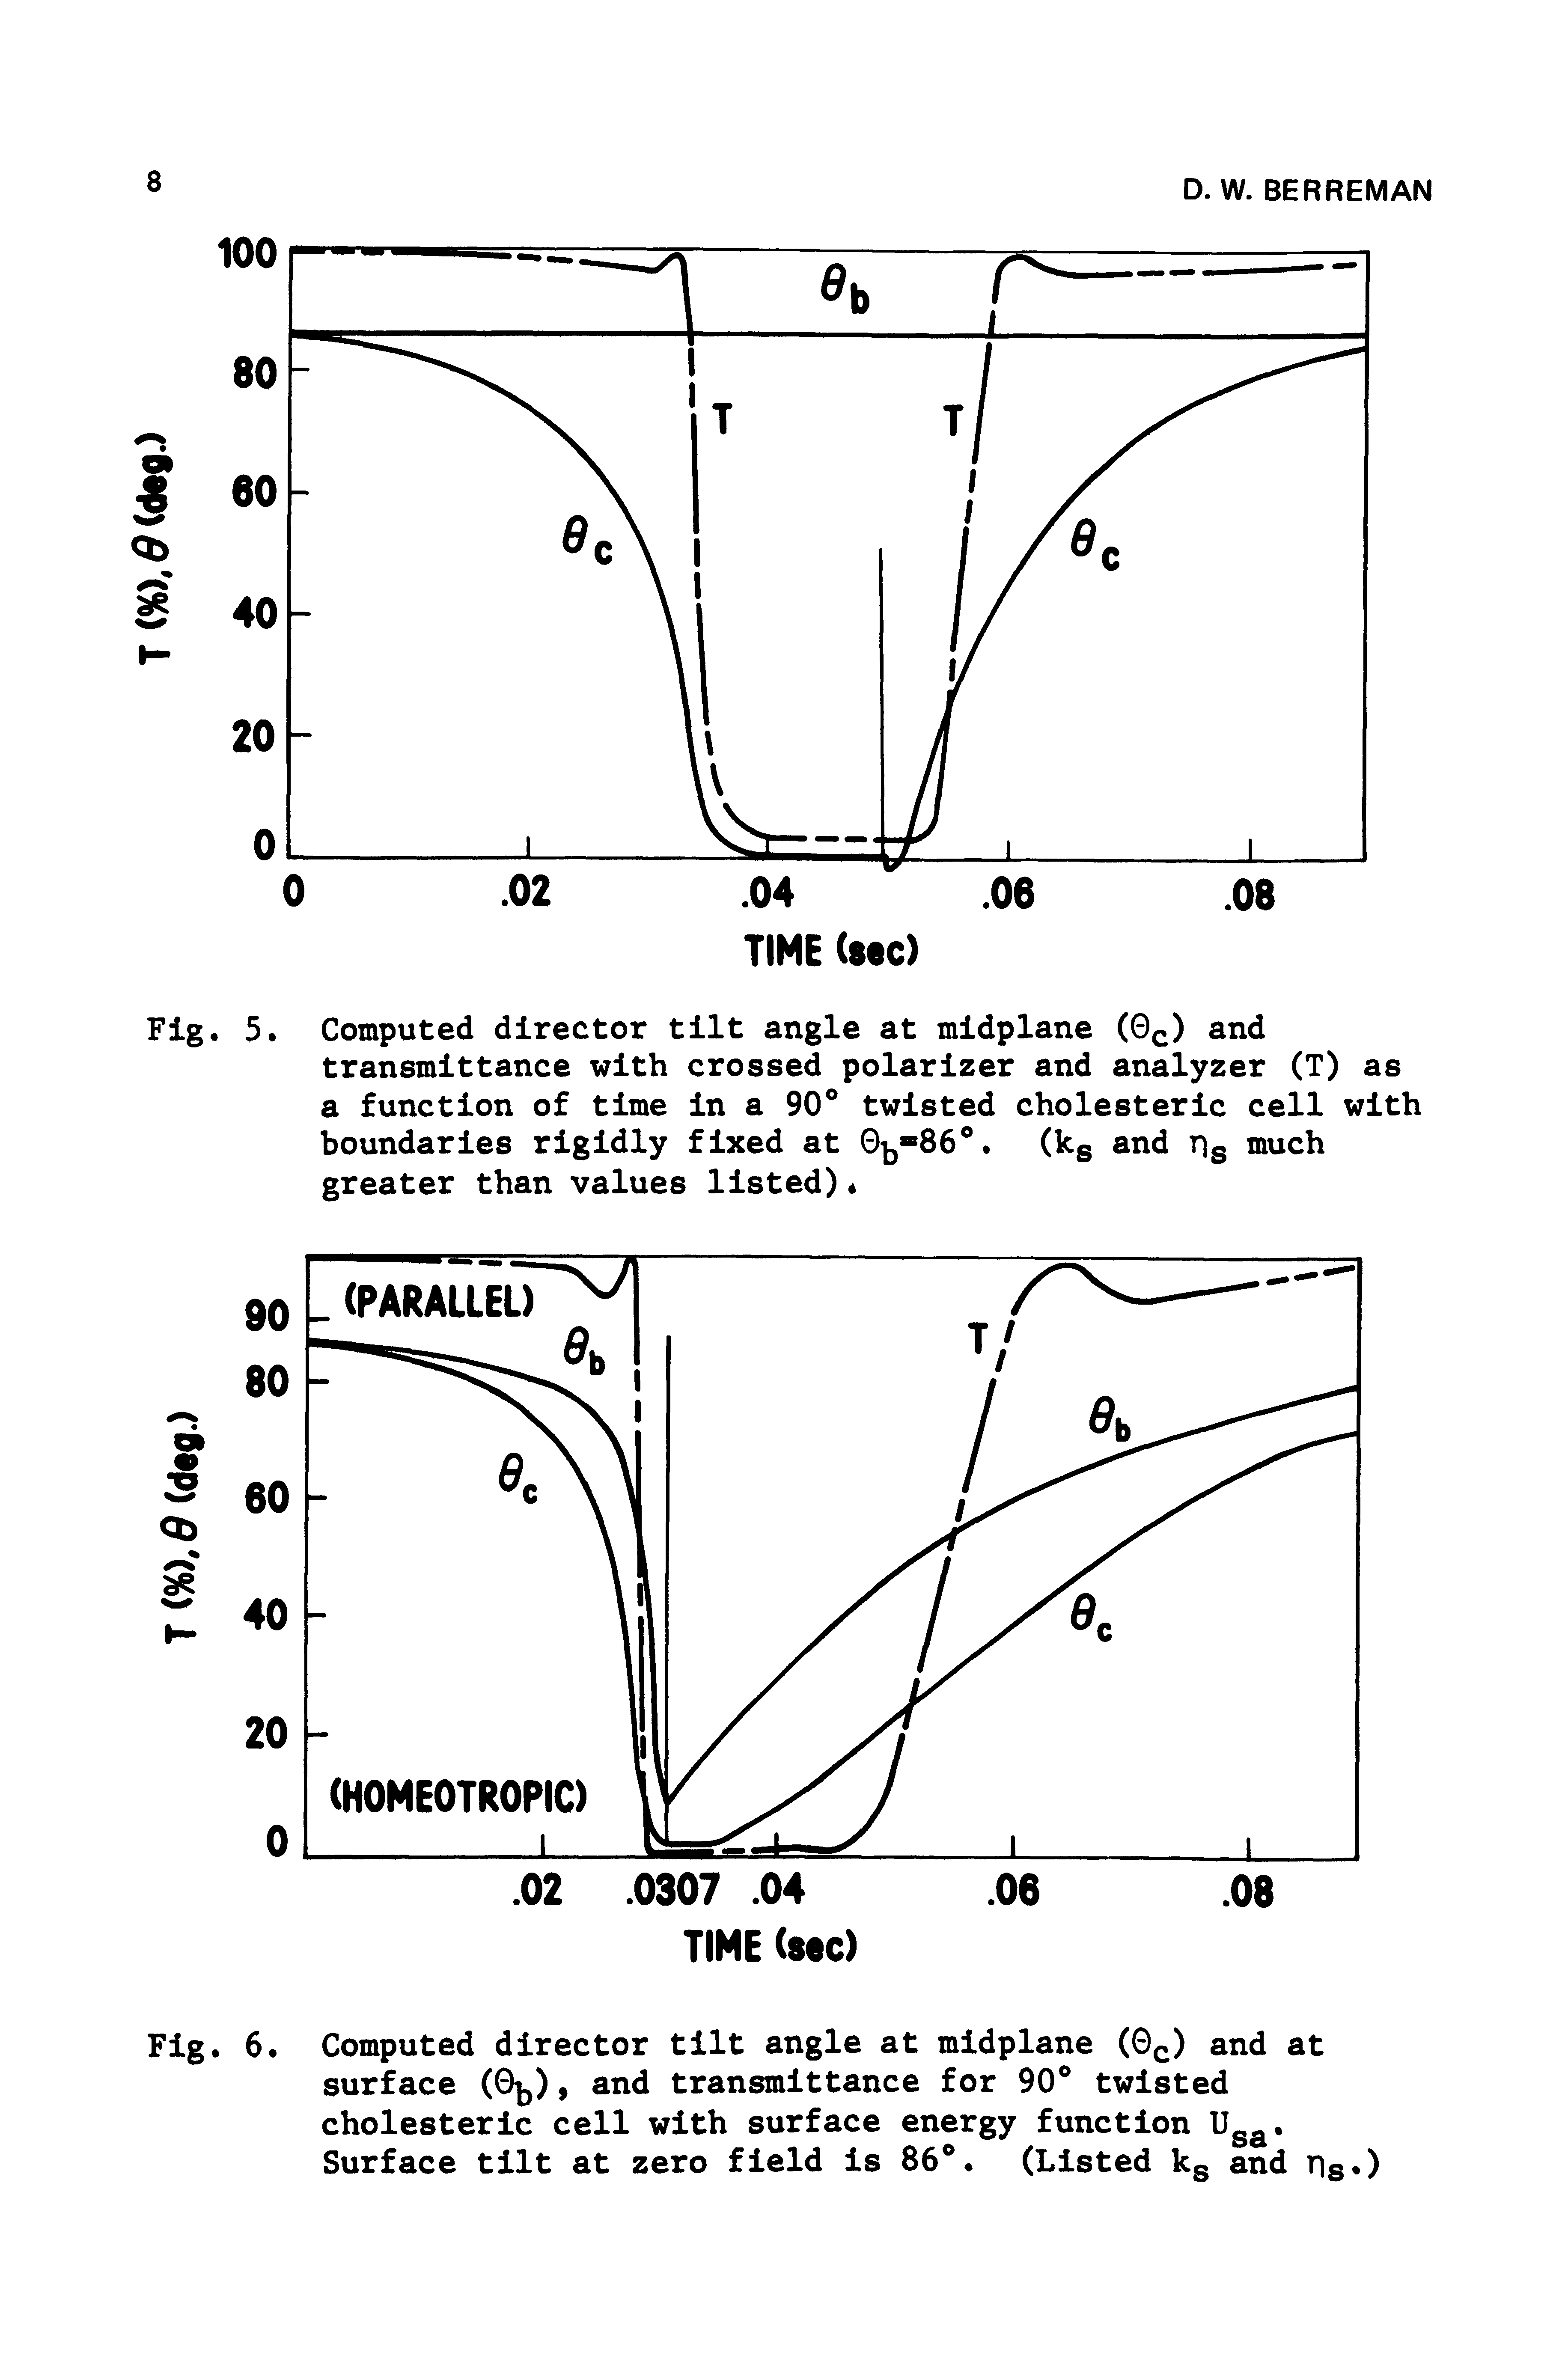 Fig. 6. Computed director tilt angle at midplane (O ) and at surface (0 j), and transmittance for 90° twisted cholesteric cell with surface energy function Ug. Surface tilt at zero field Is 86°. (Listed kg and risO...